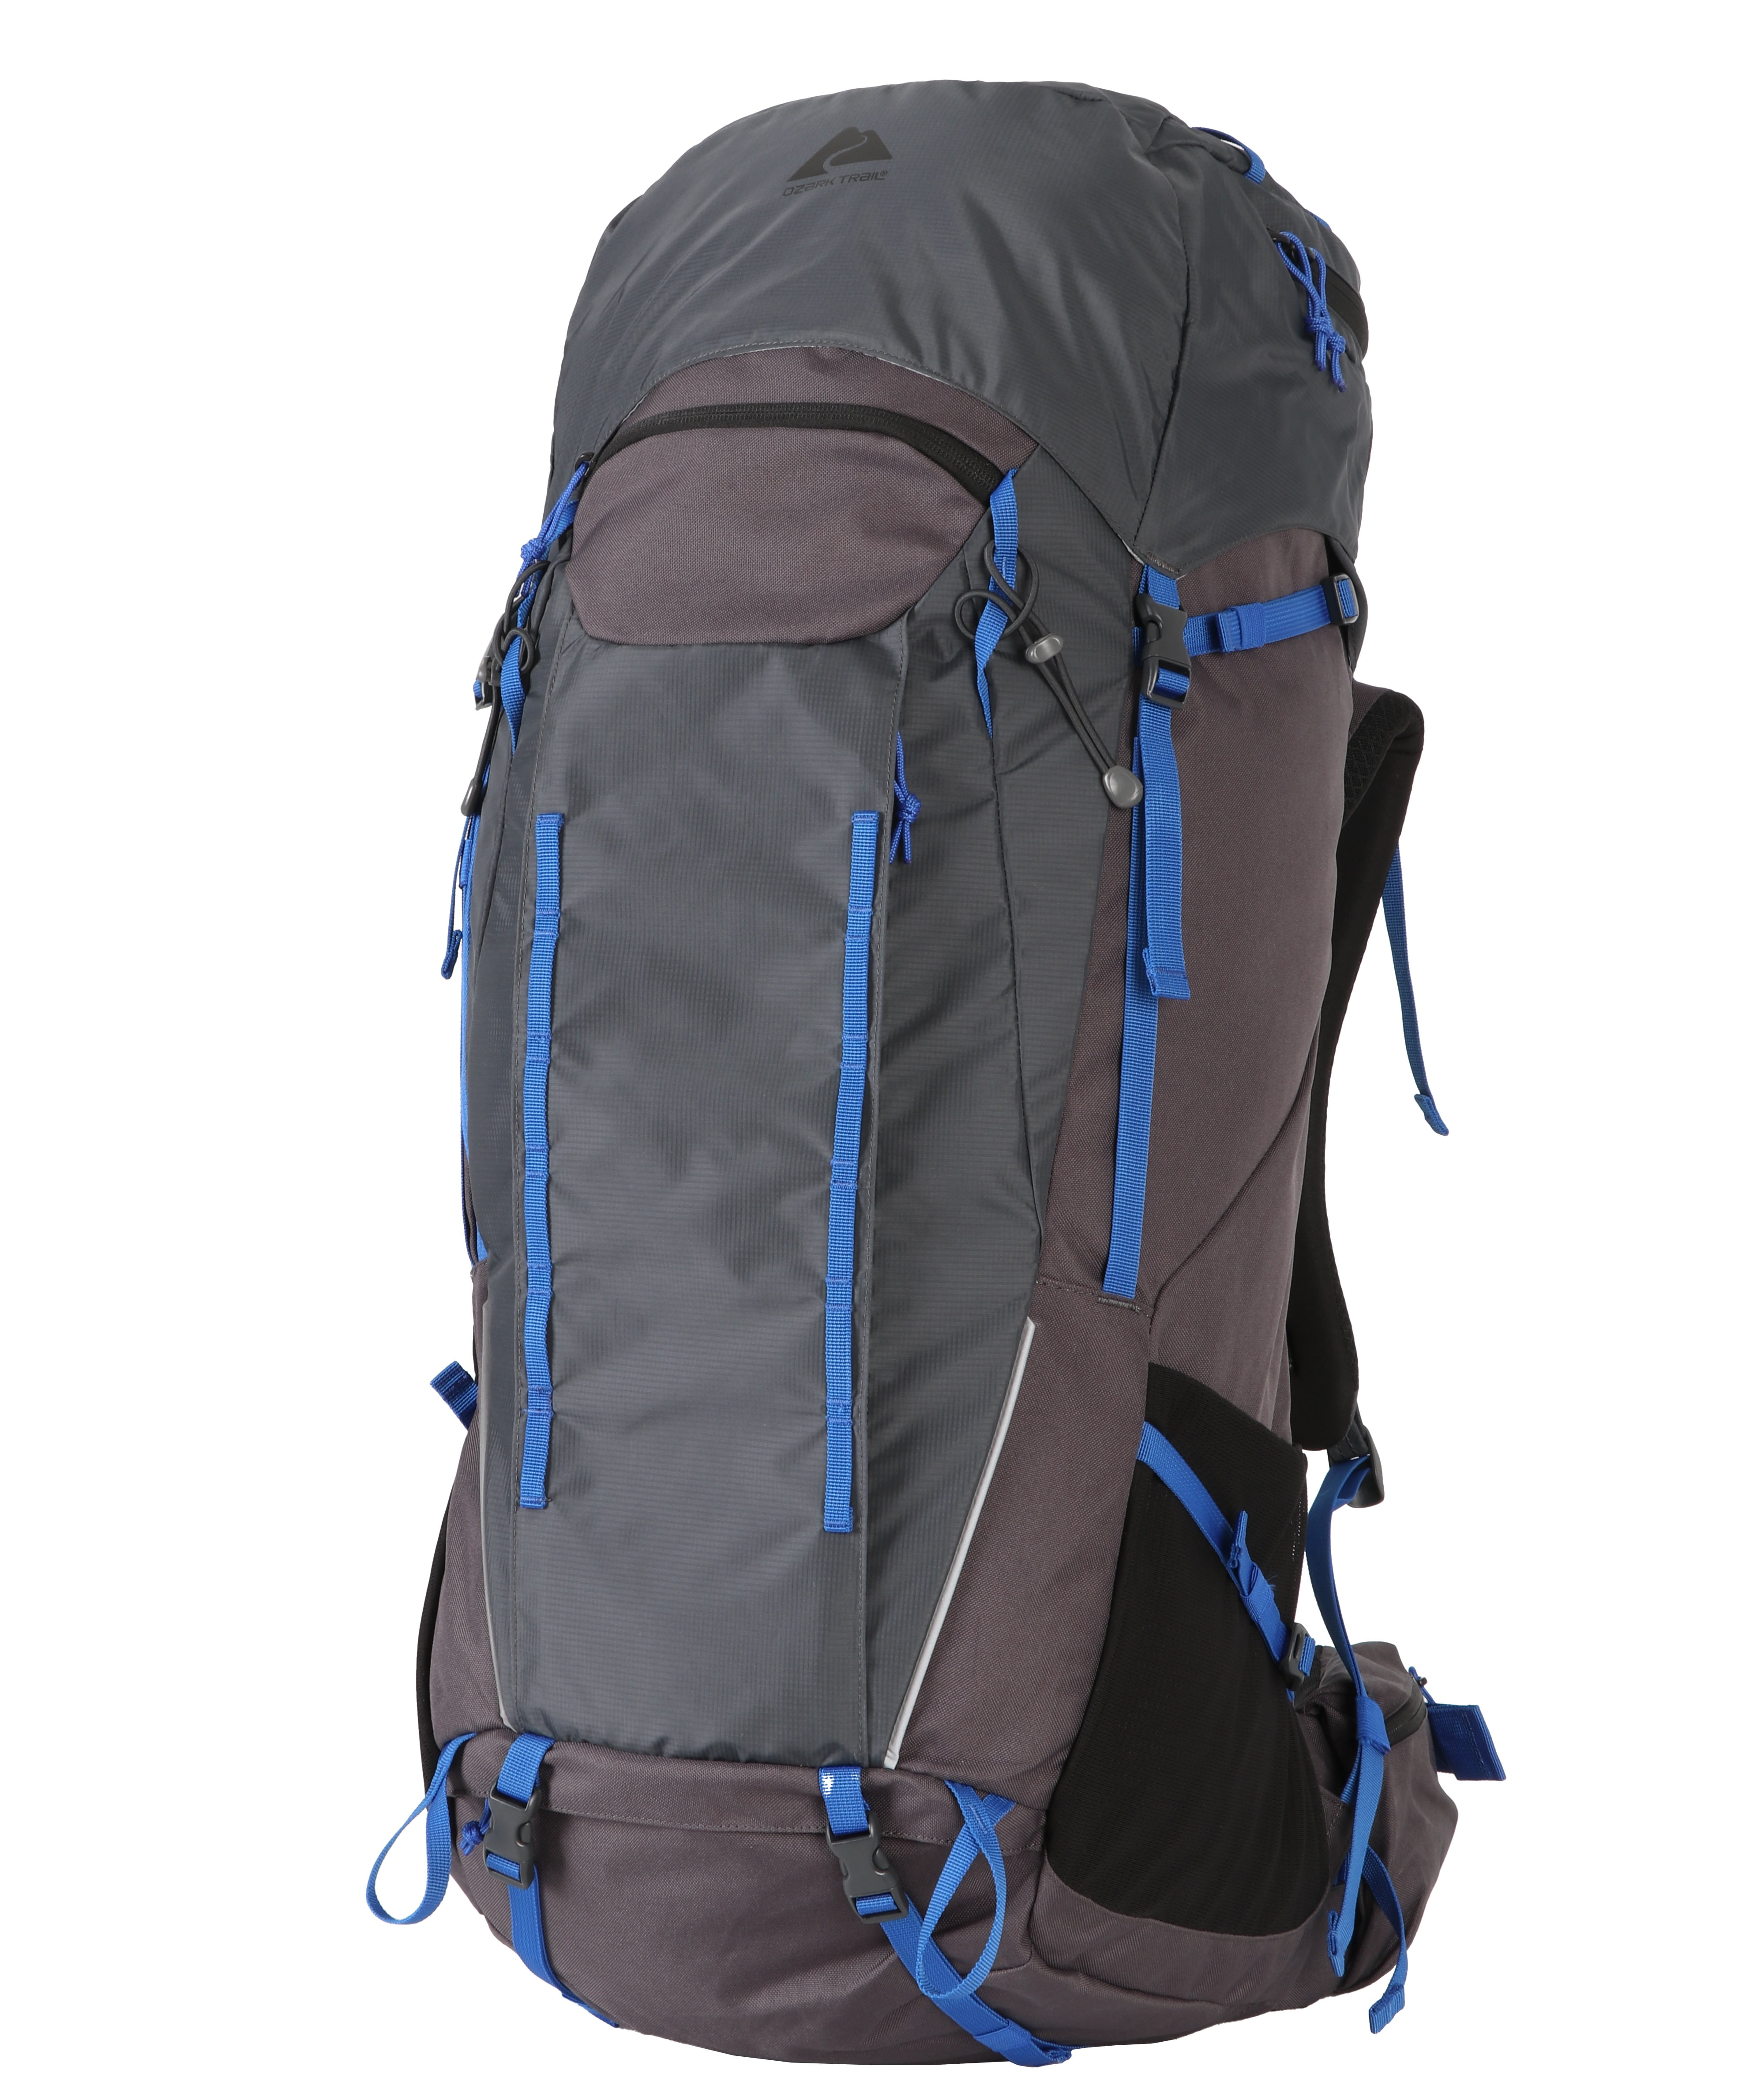 AIR Travel and Hiking Rucksack | Black | 62 Litres – Tripole Gears